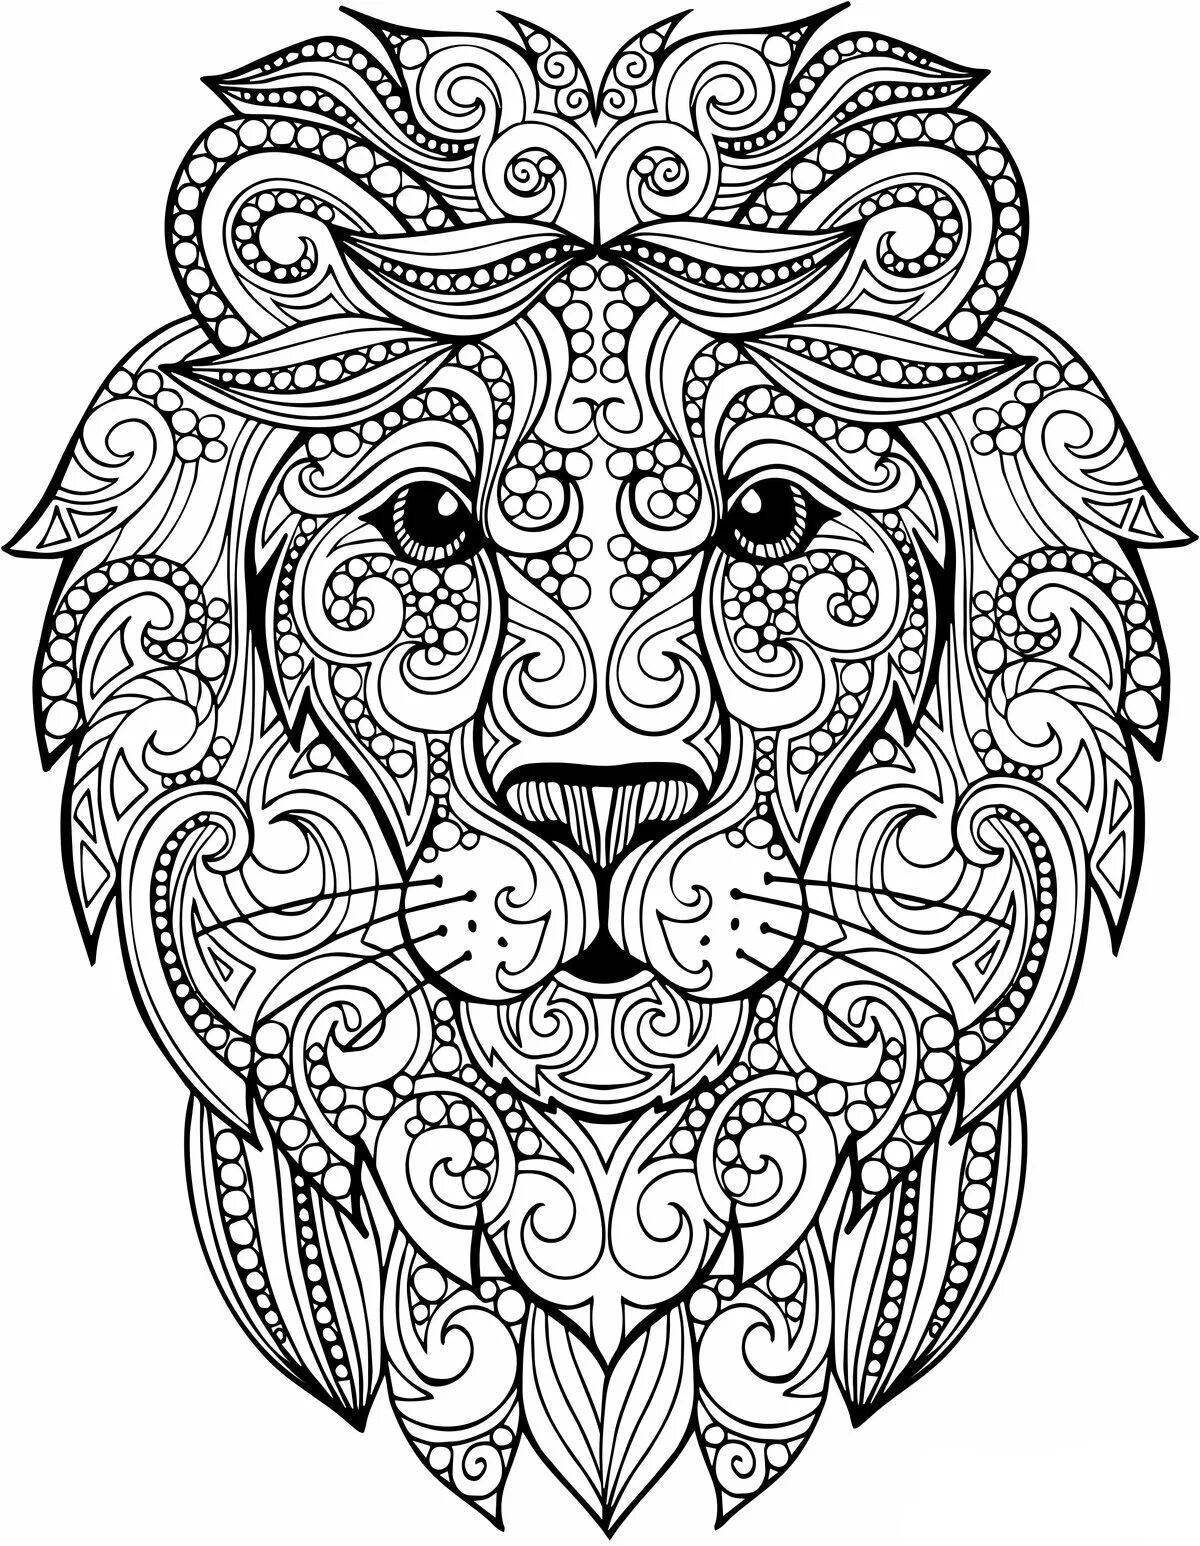 Coloured anti-stress coloring book for children